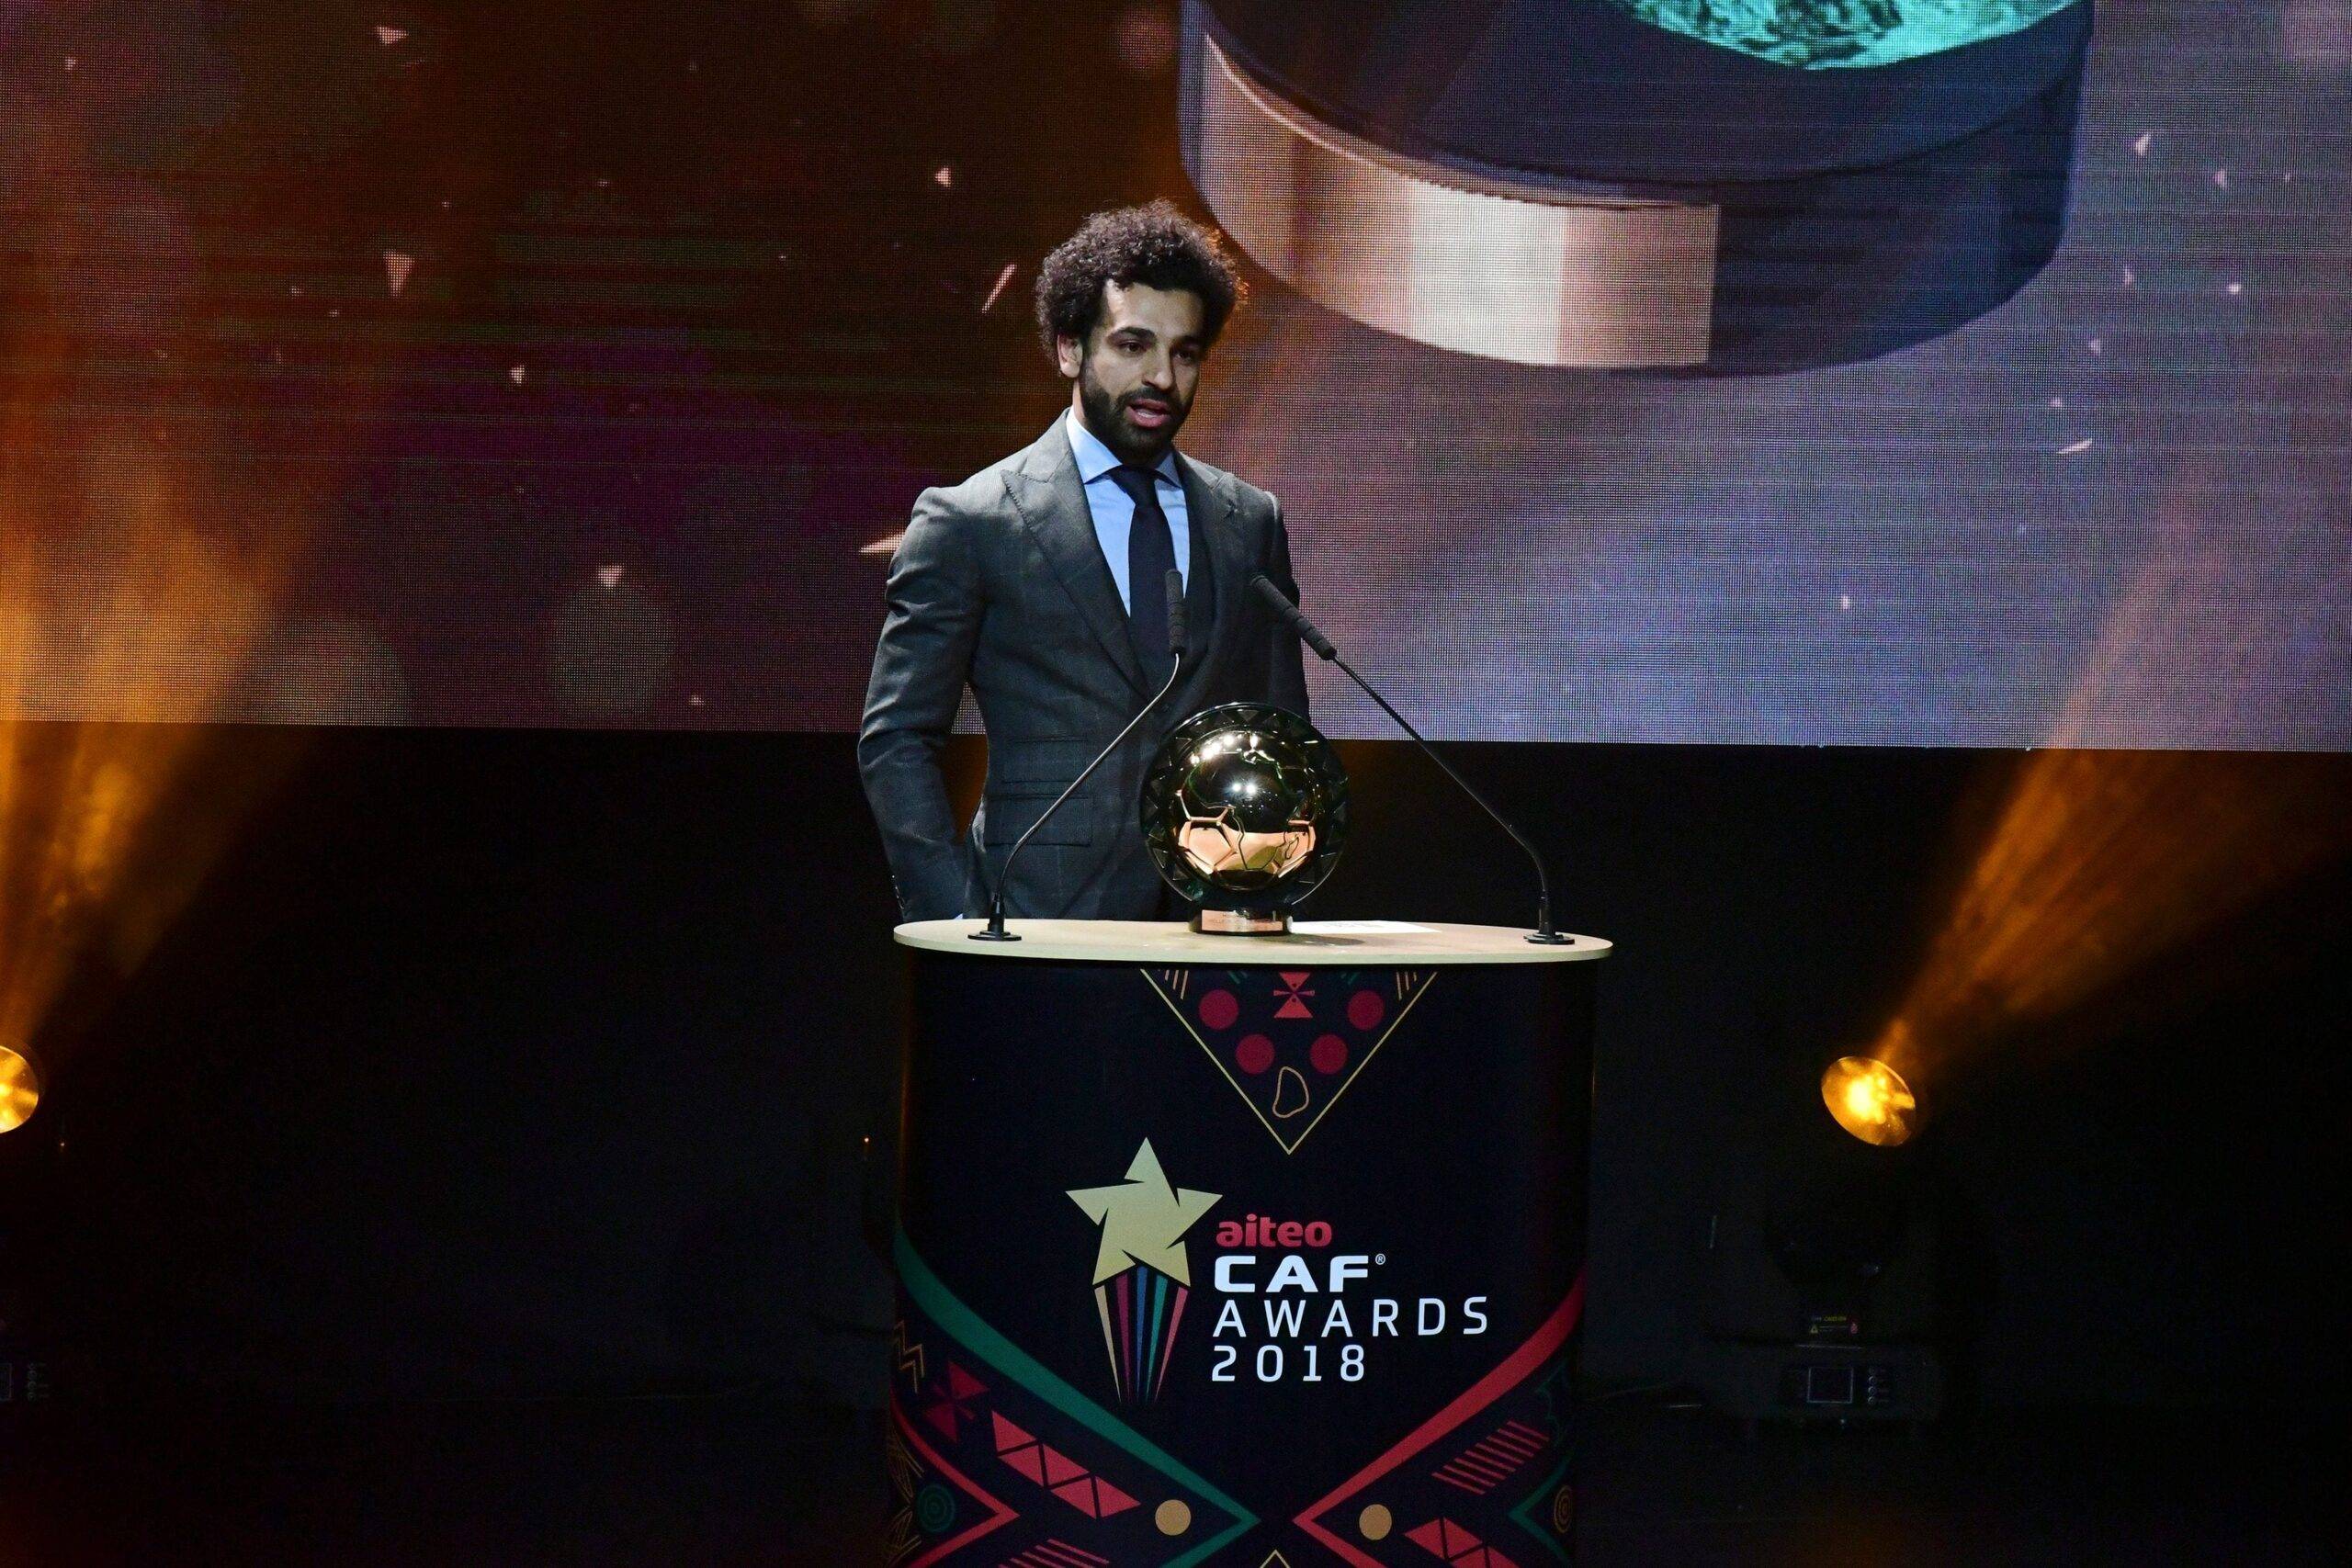 Liverpool's Egyptian forward Mohamed Salah speaks on stage after winning the 2018 African Footballer of the Year Award also called Ballon d'Or during the CAF award ceremony in Dakar, Senegal 8 January 2019 [SEYLLOU/AFP/Getty Images]